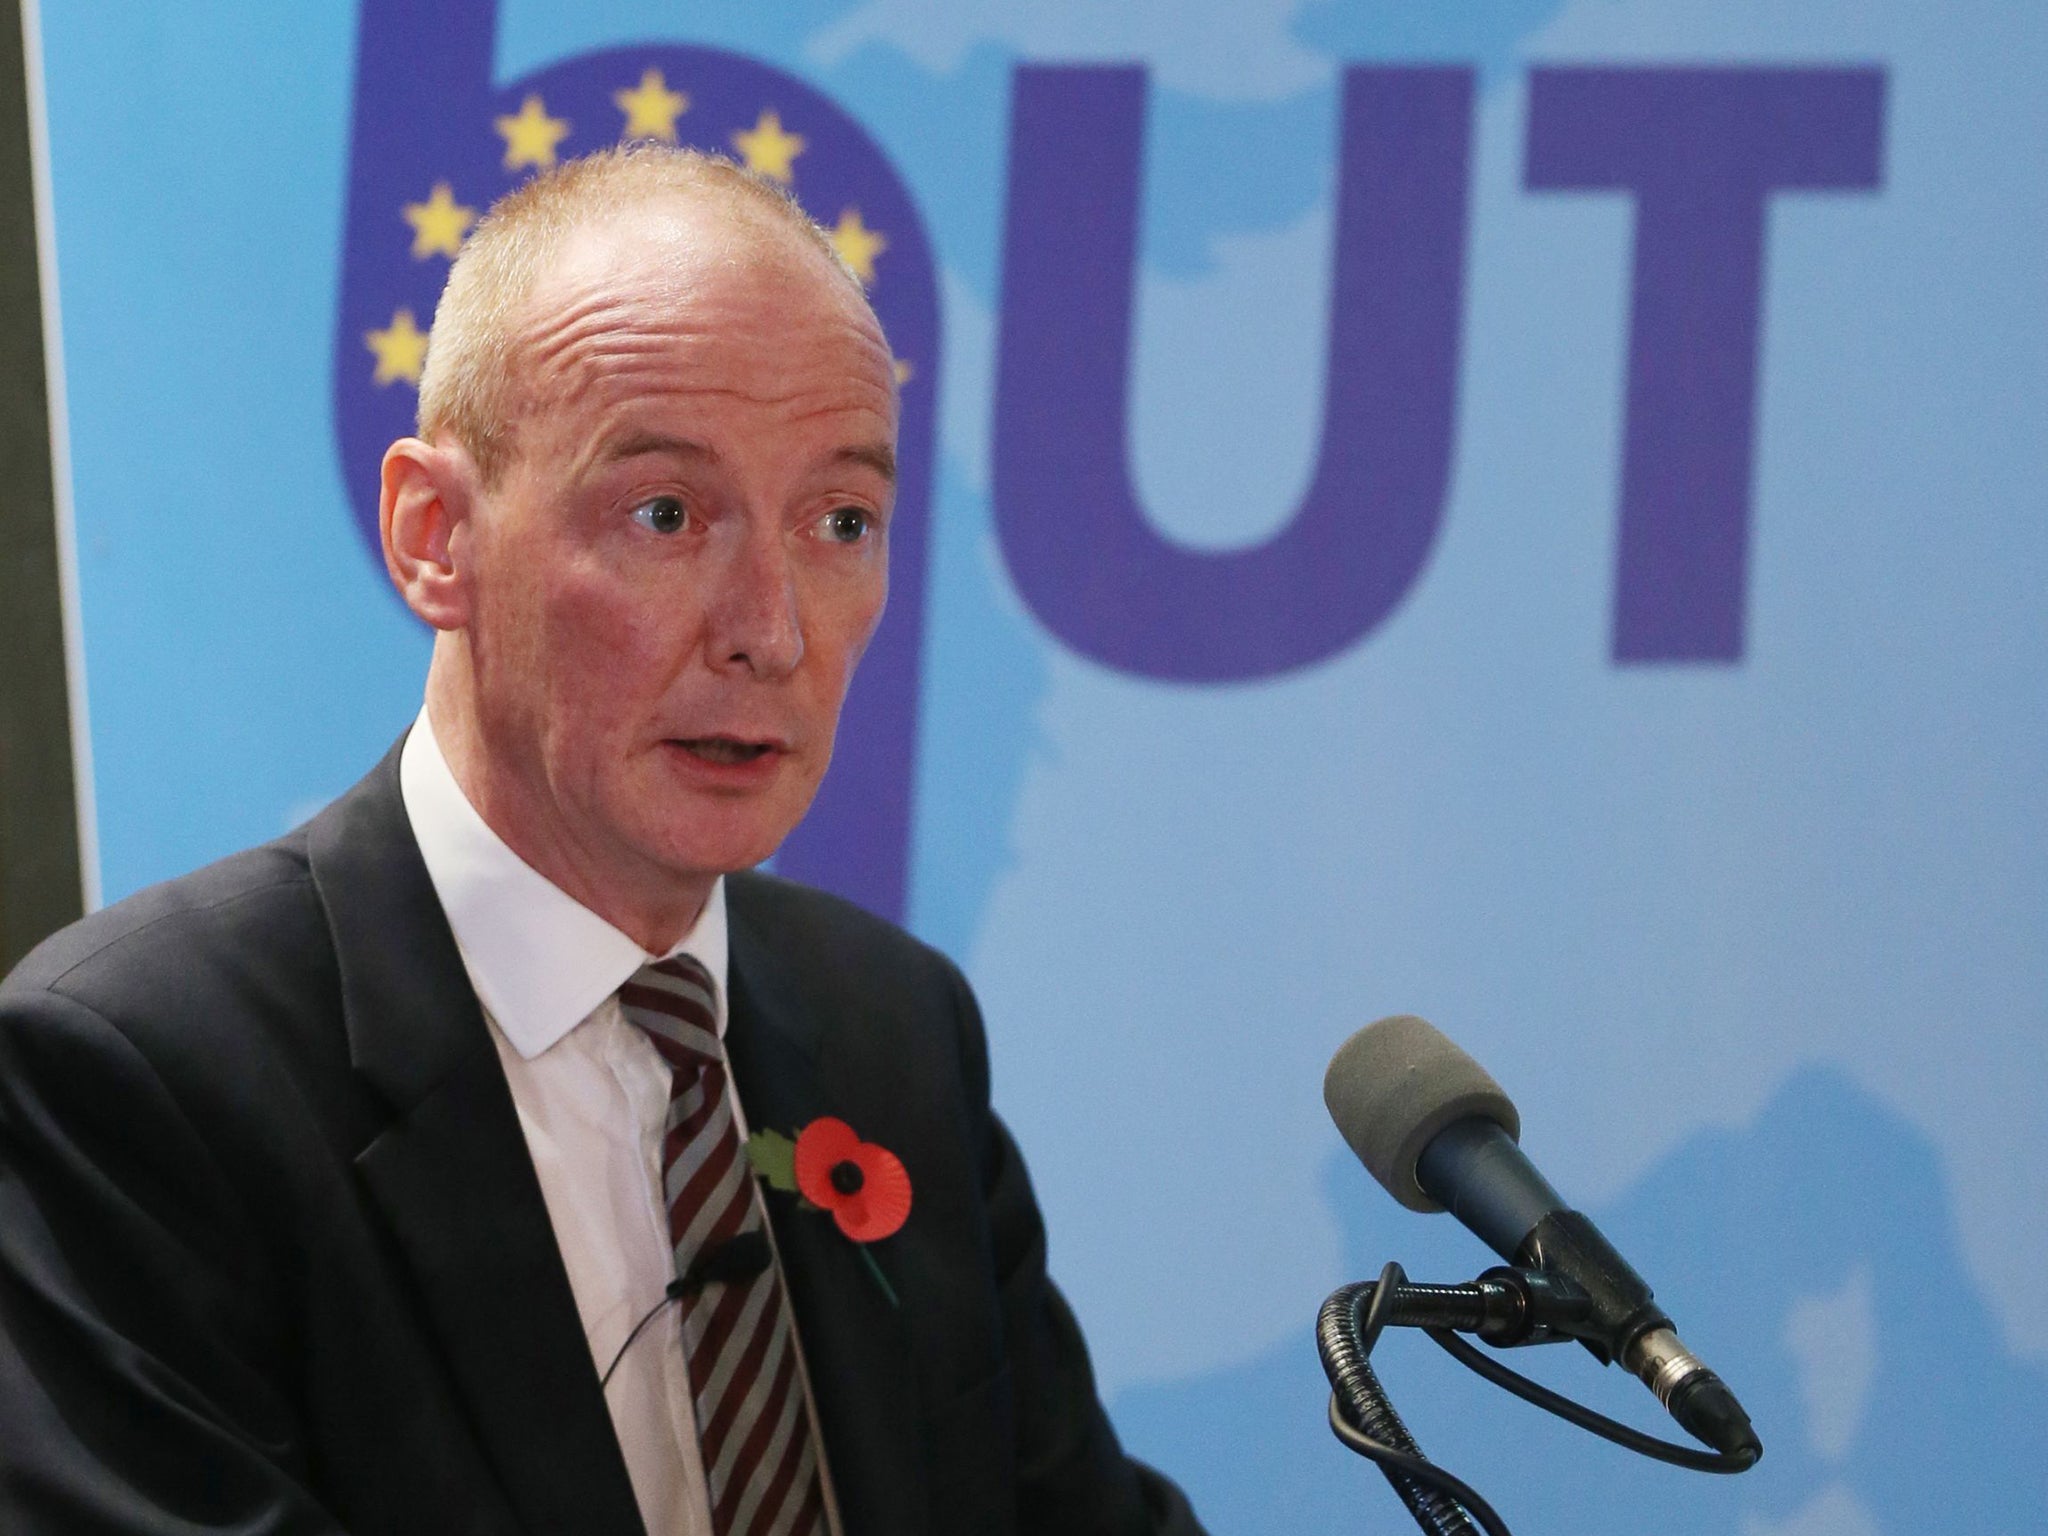 Pat McFadden has been sacked as shadow Europe minister over "disloyalty" to leader Jeremy Corbyn